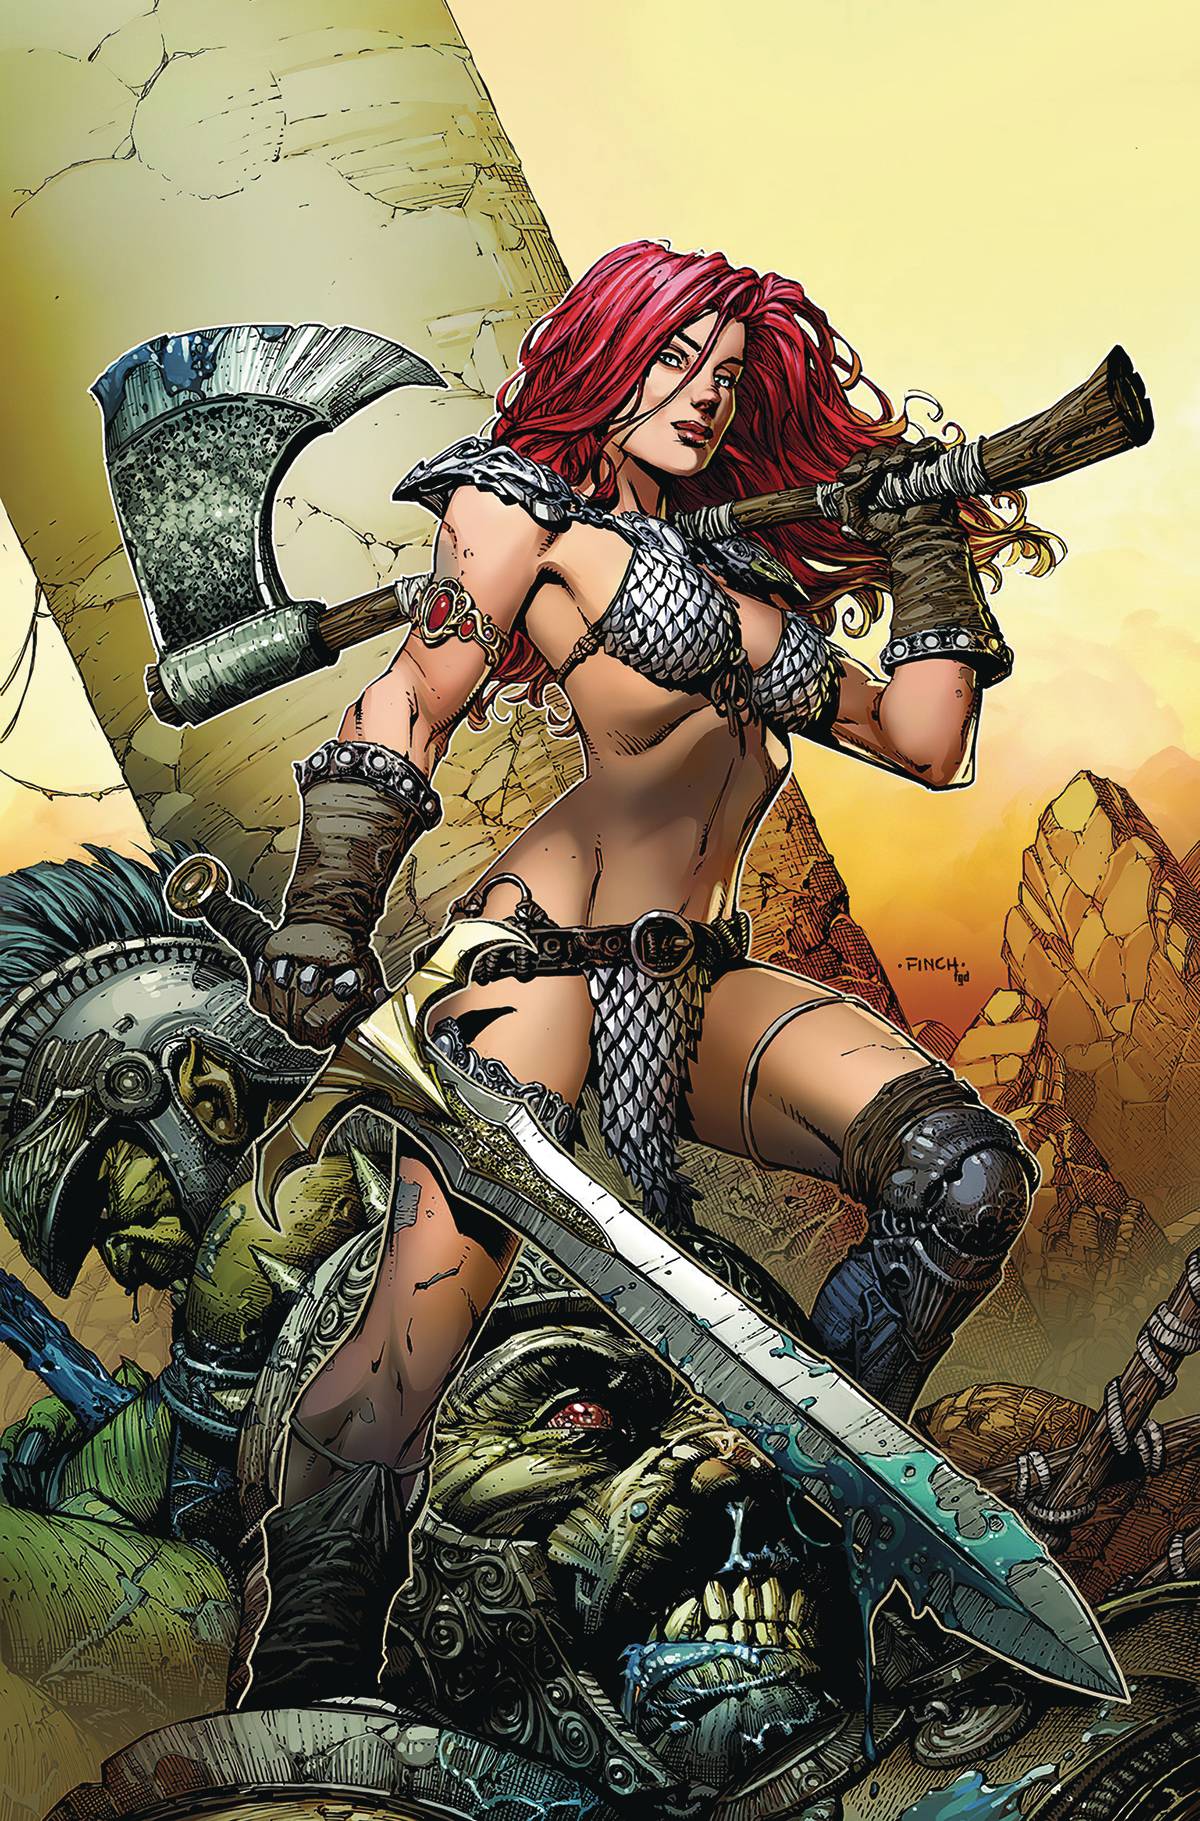 RED SONJA PRICE OF BLOOD #1 FINCH COLOR CROWDFUNDER CVR